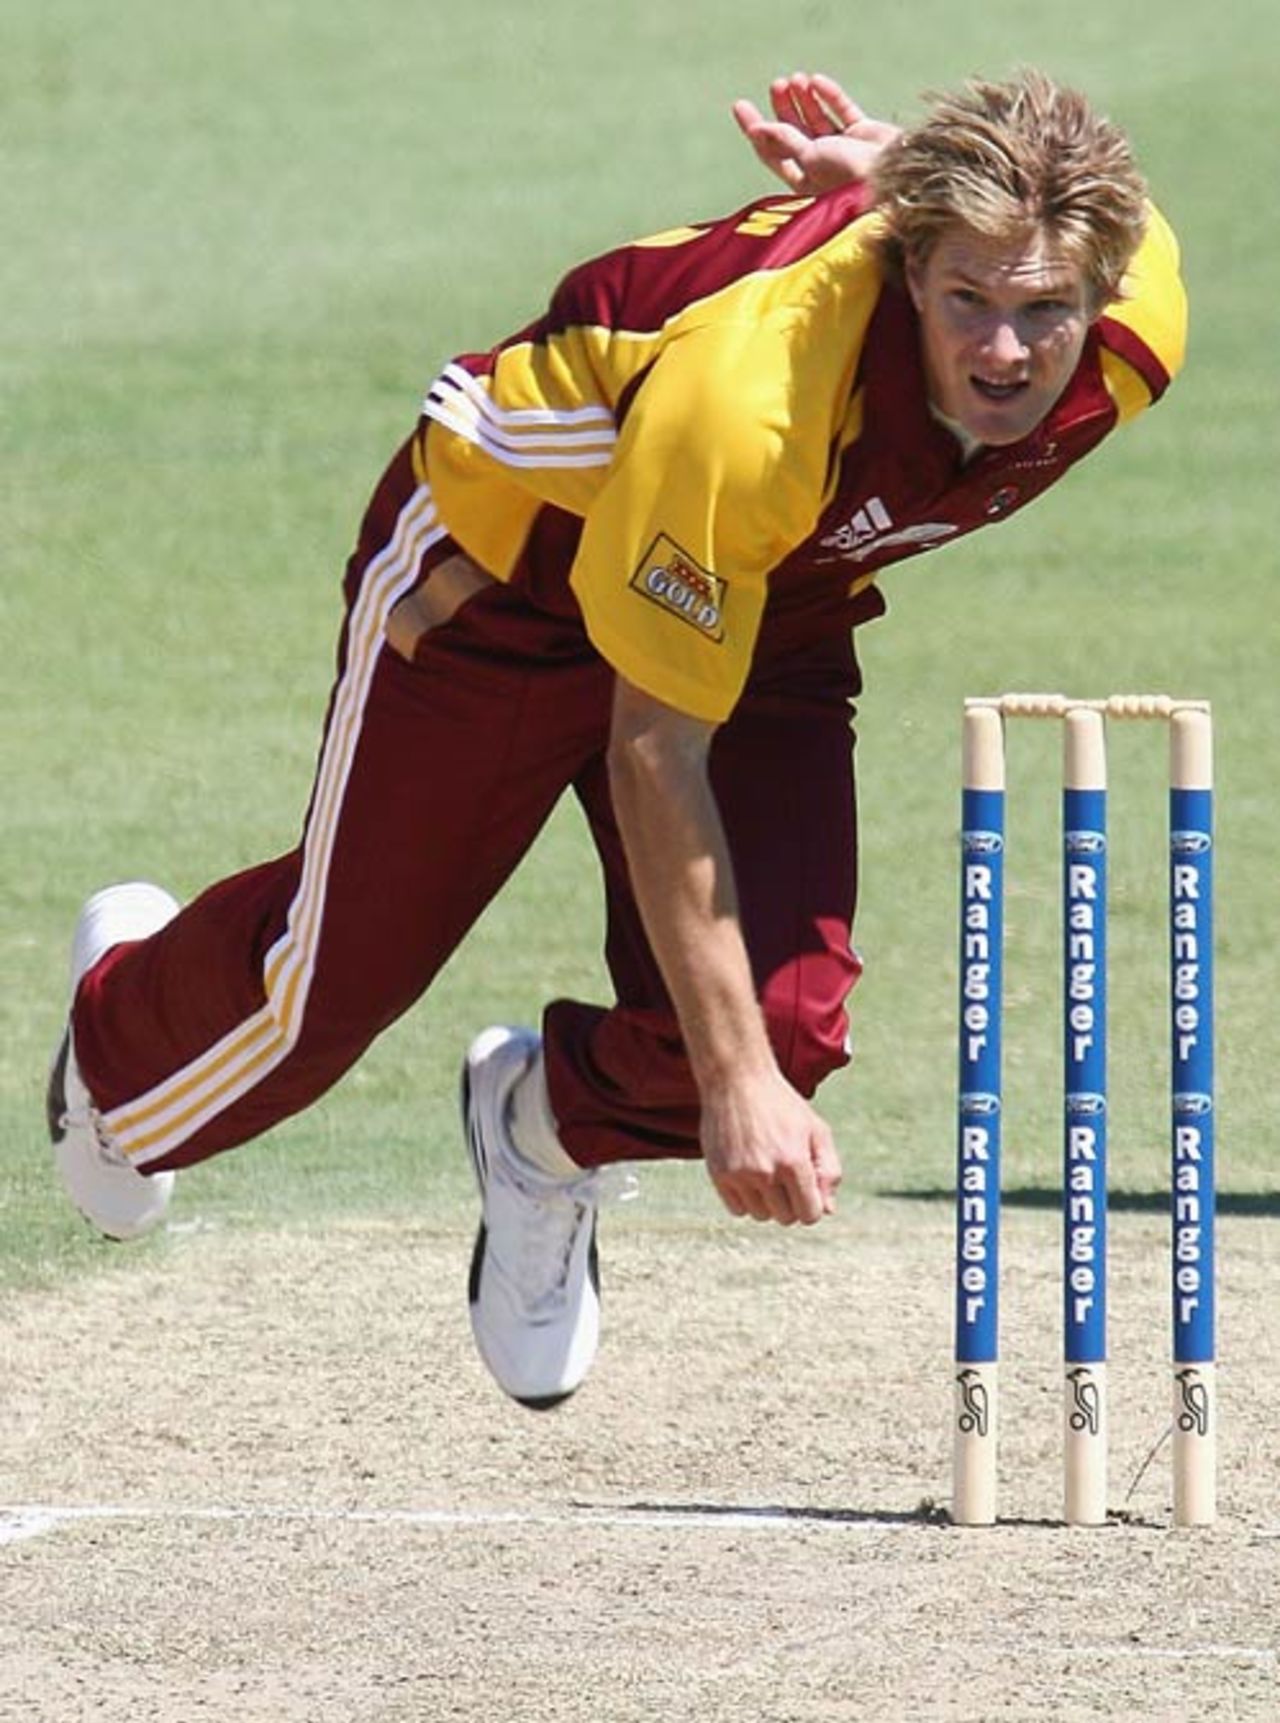 Shane Watson bowls as Western Australia score 340 from their 50 overs, Western Australia v Queensland, Ford Ranger One Day Cup, Perth, November 17, 2006